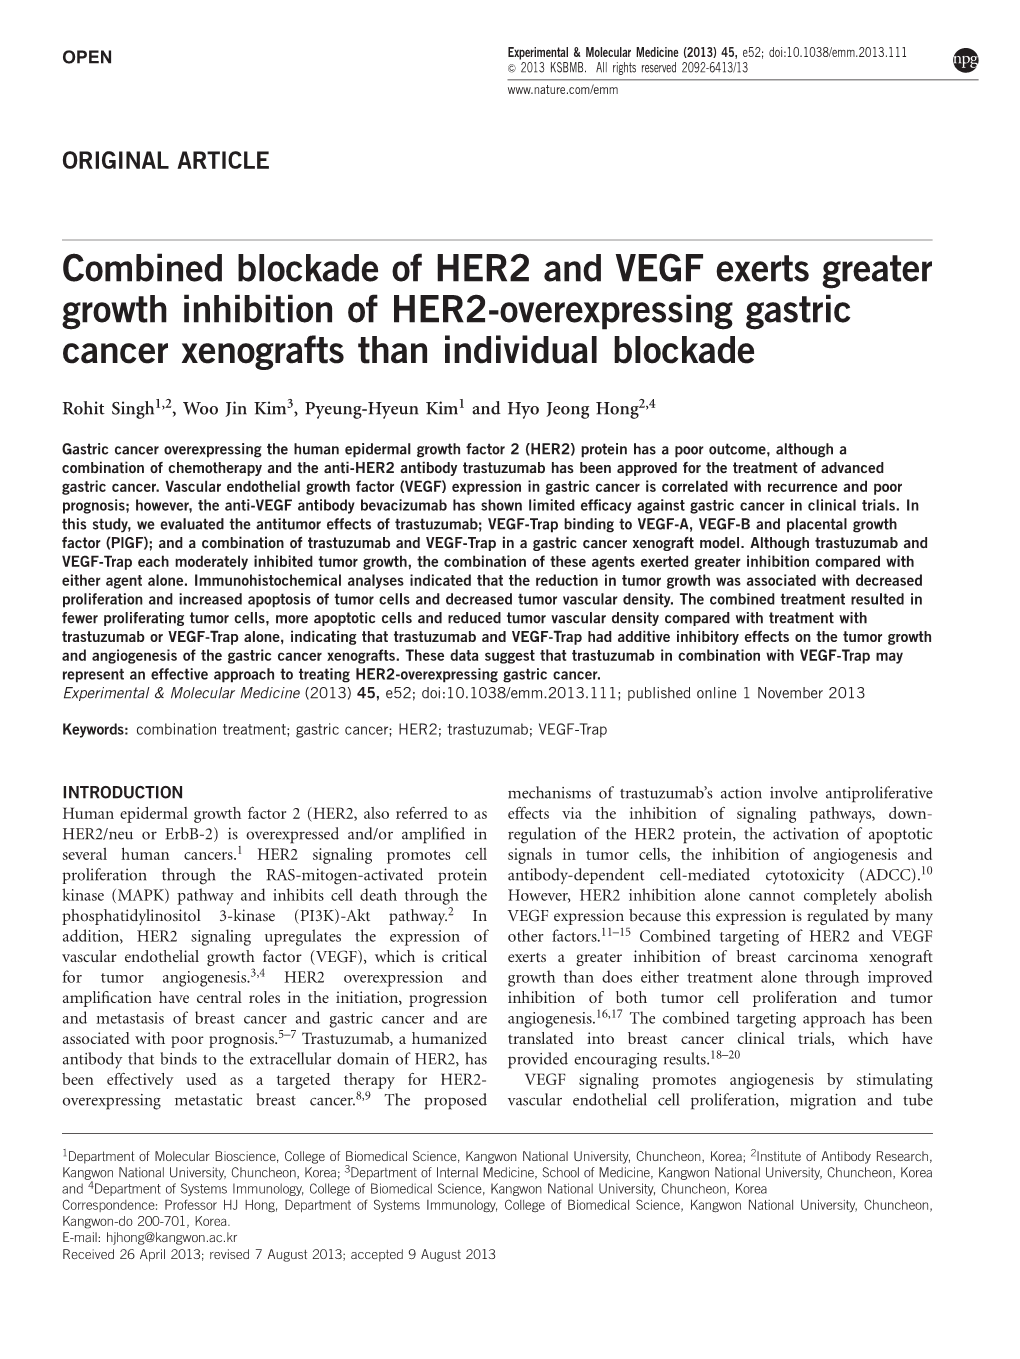 Combined Blockade of HER2 and VEGF Exerts Greater Growth Inhibition of HER2-Overexpressing Gastric Cancer Xenografts Than Individual Blockade